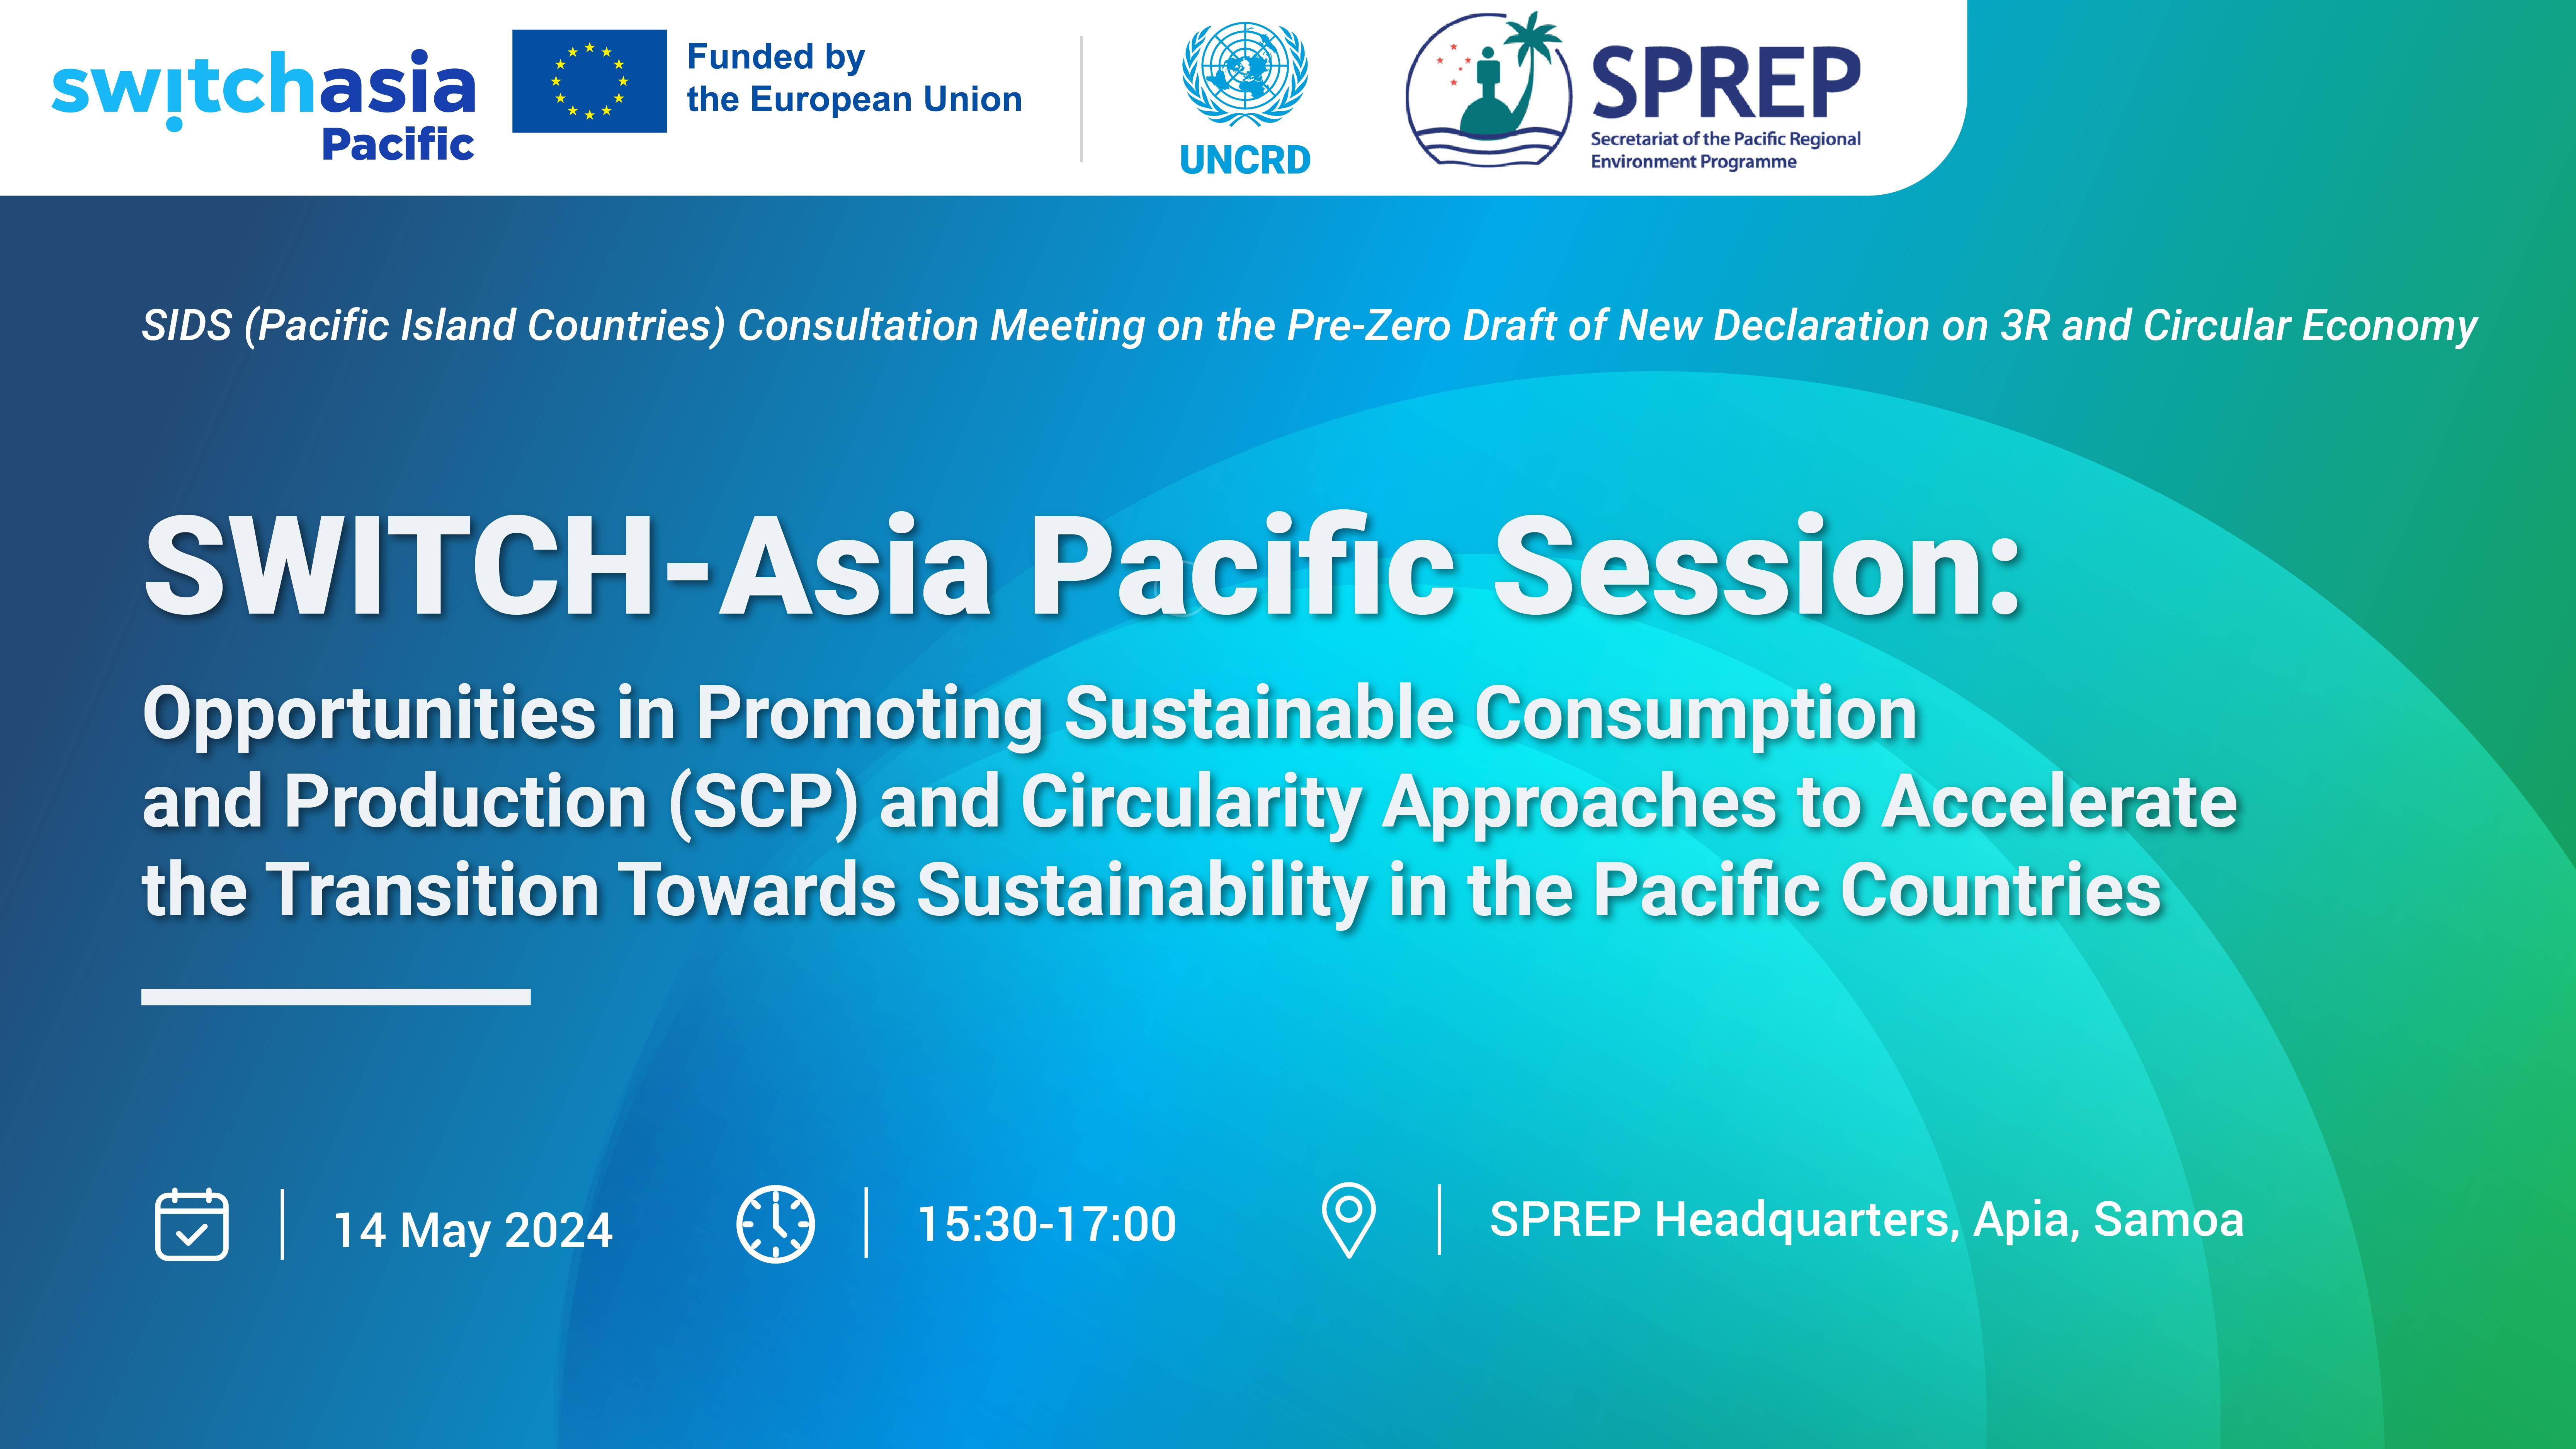 Opportunities in Promoting Sustainable Consumption and Production and Circularity Approaches to Accelerate the Transition Towards Sustainability in the Pacific Countries